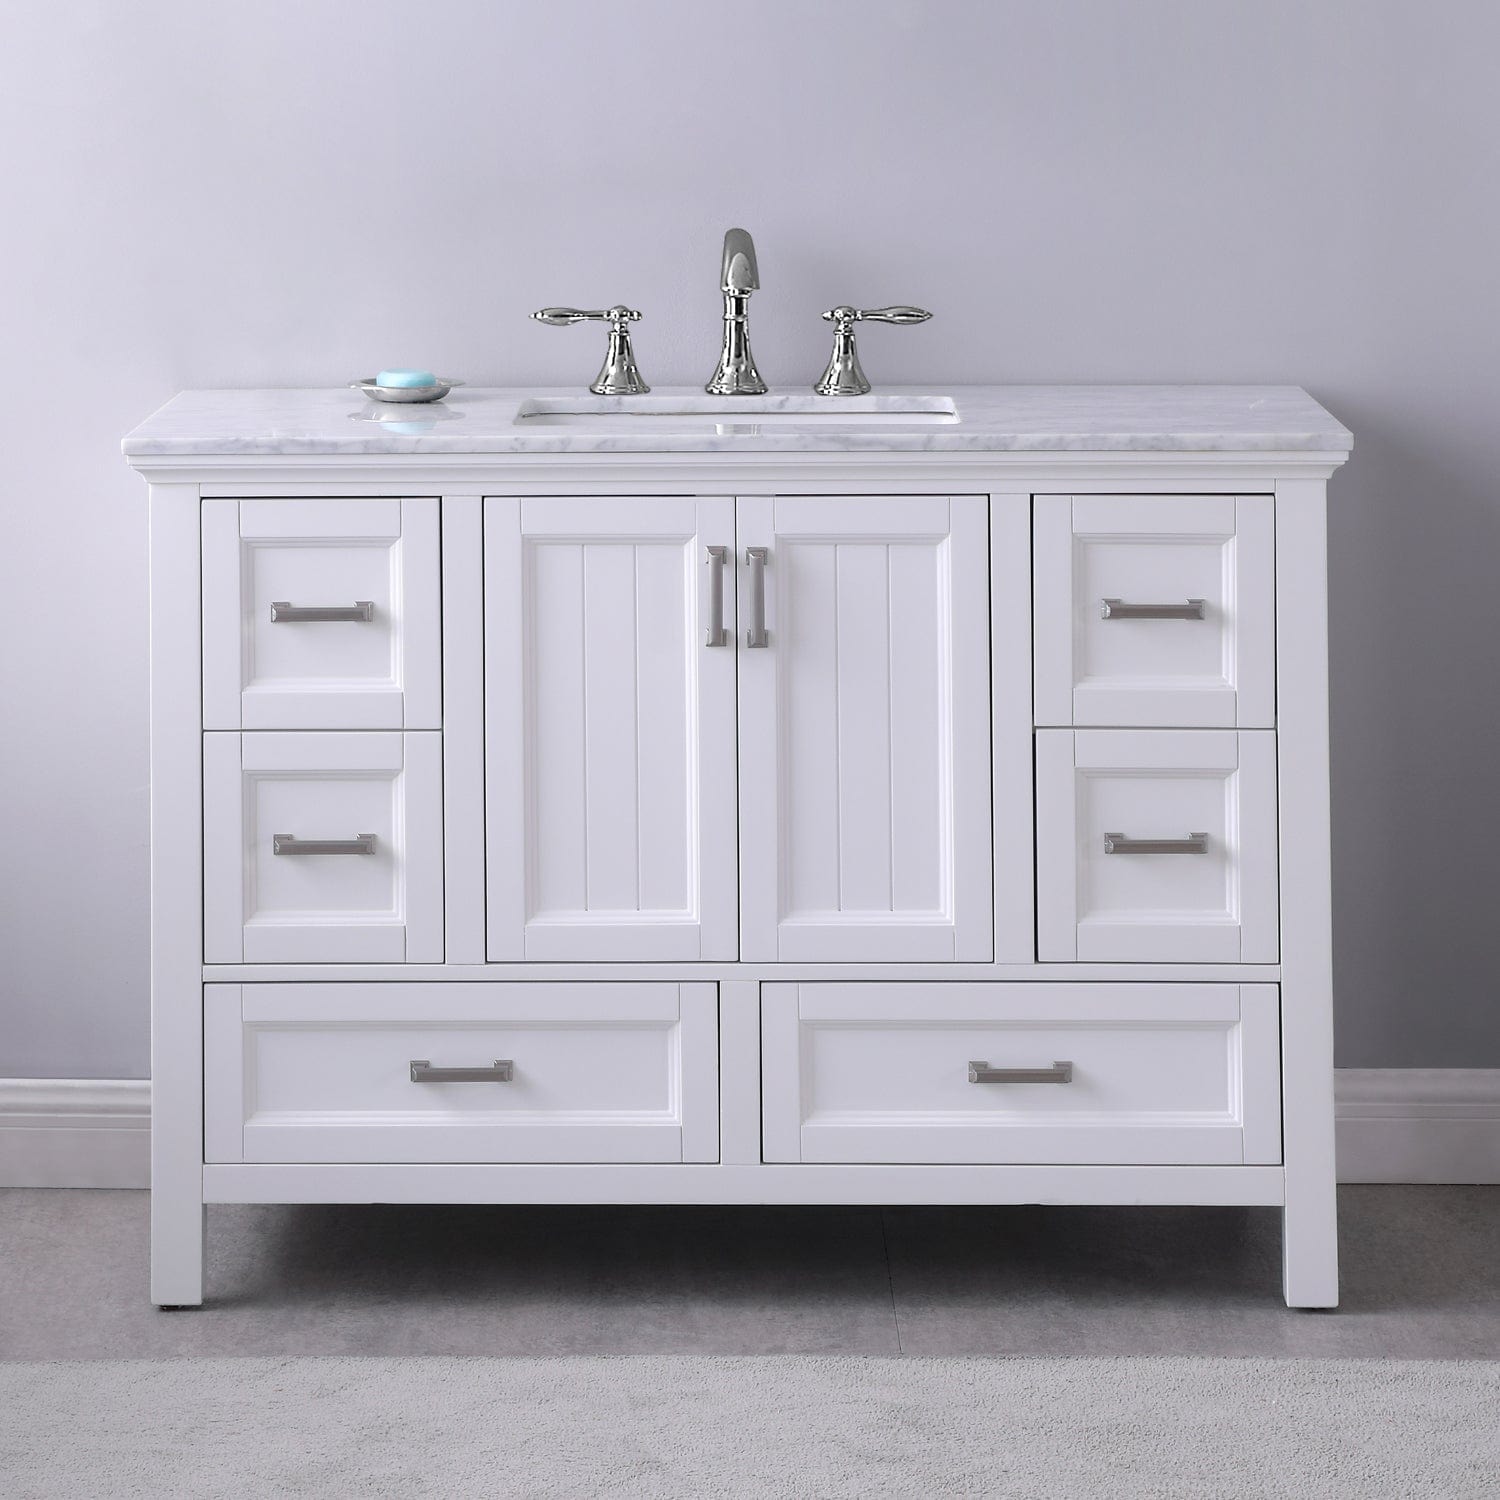 Altair Isla 48" Single Bathroom Vanity Set in White and Carrara White Marble Countertop without Mirror 538048-WH-CA-NM - Molaix631112970884Vanity538048-WH-CA-NM